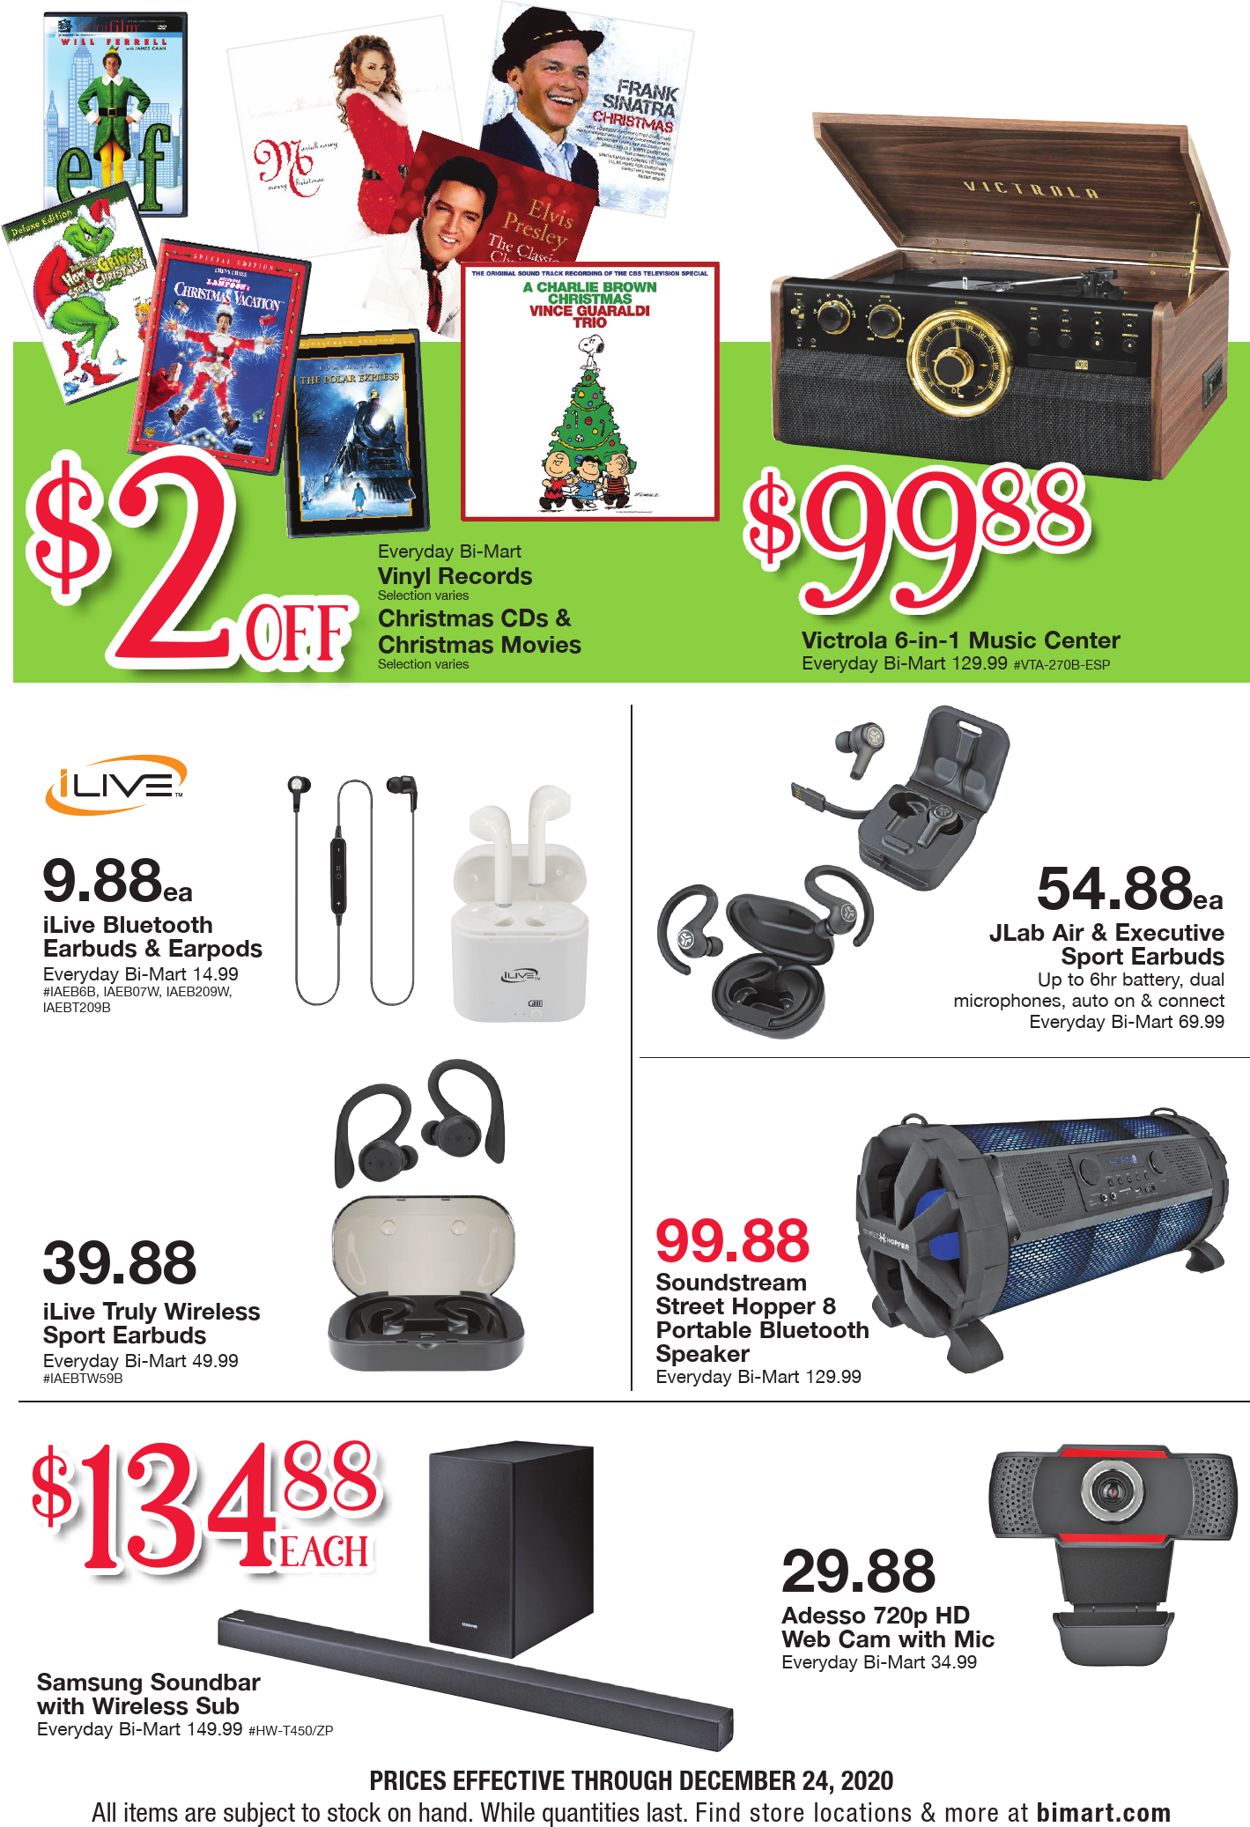 Catalogue Bi-Mart Last Minute Gift Guide 2020 from 12/21/2020